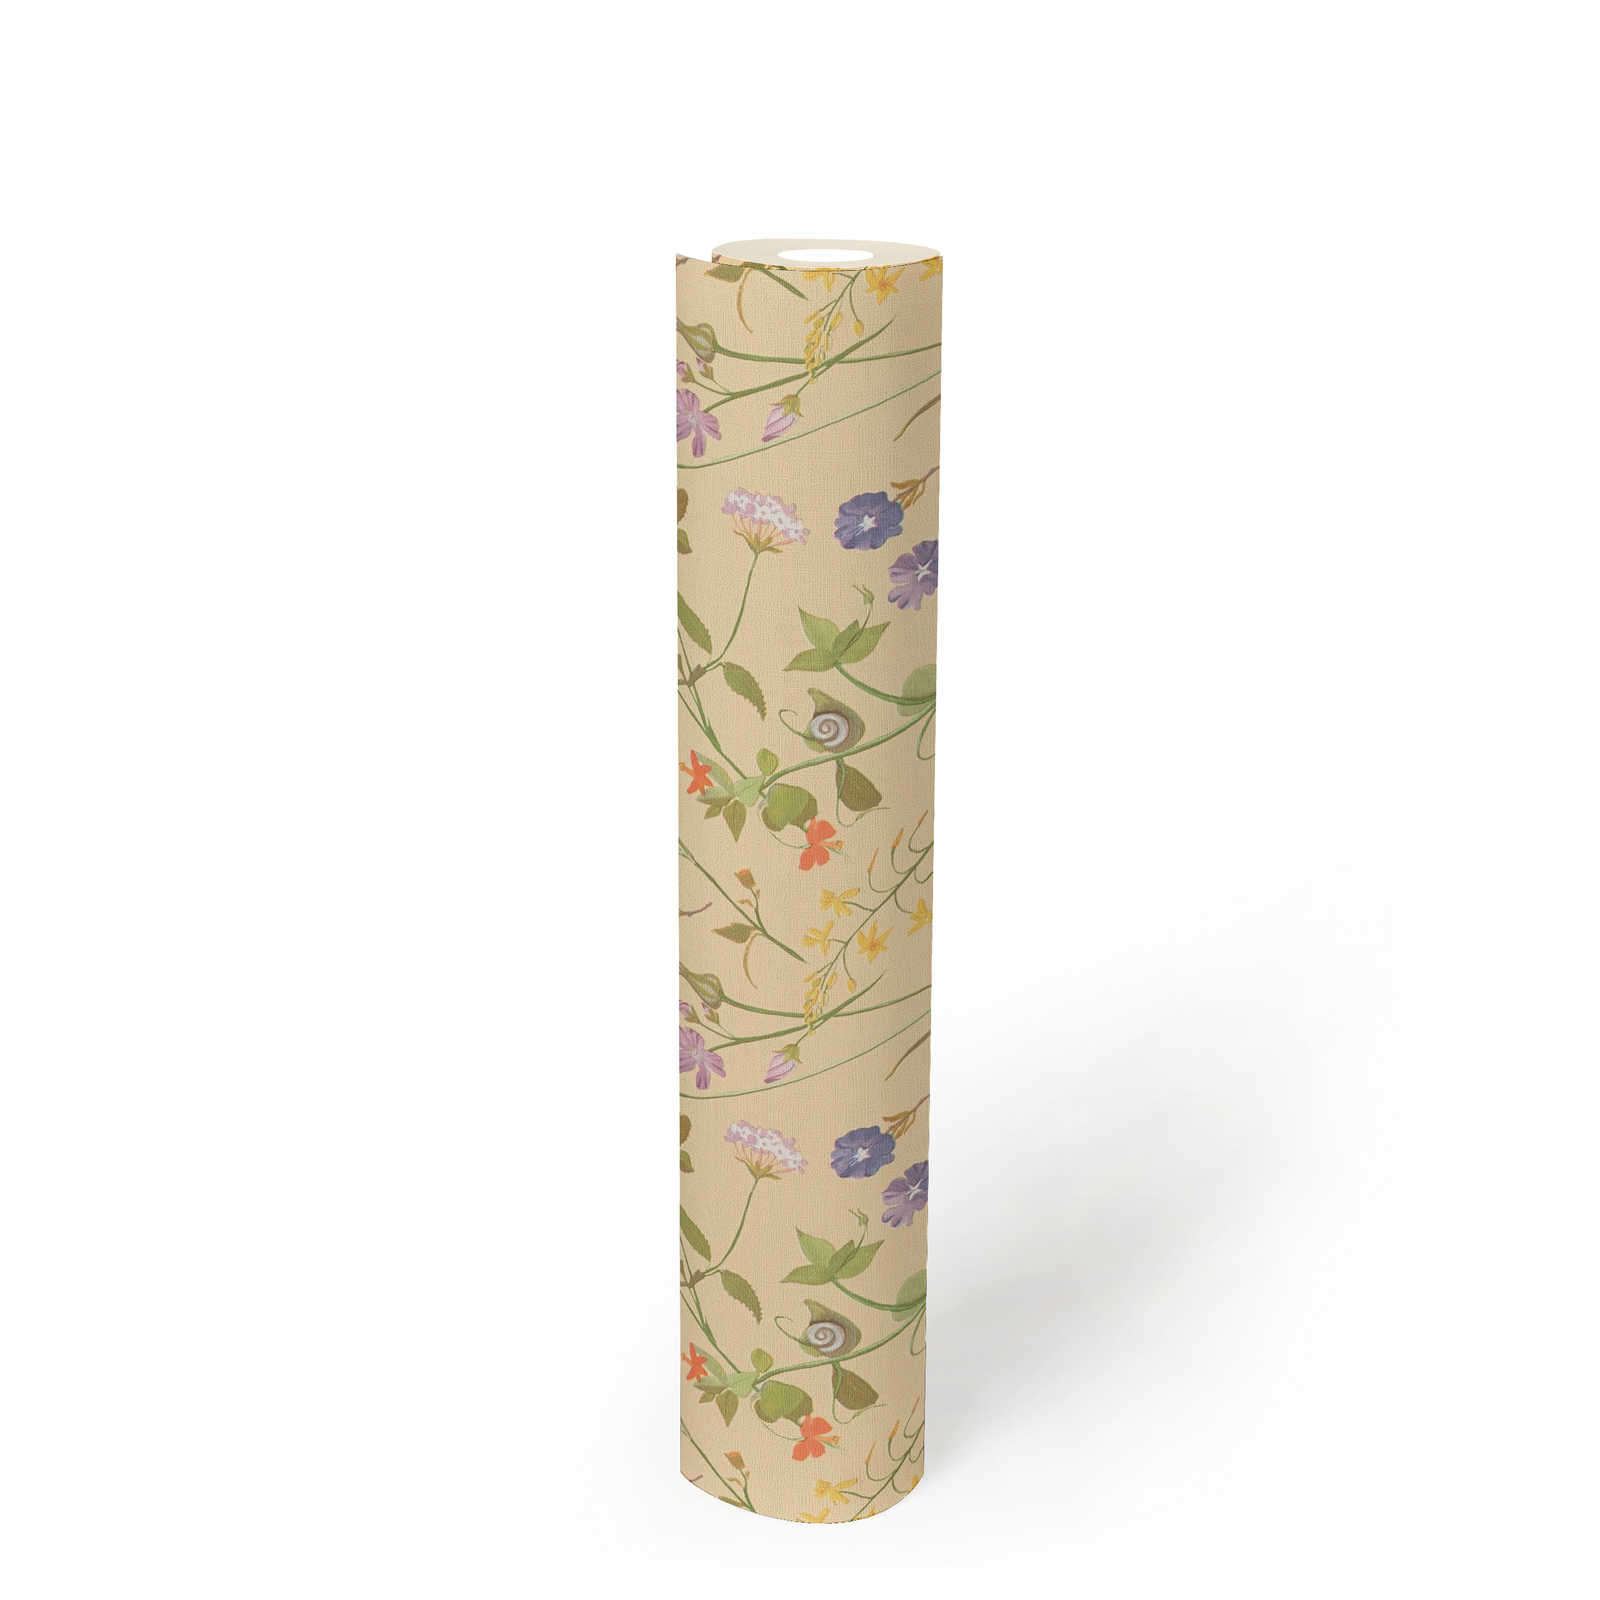             Playful non-woven wallpaper with different flowers - yellow, green, colourful
        